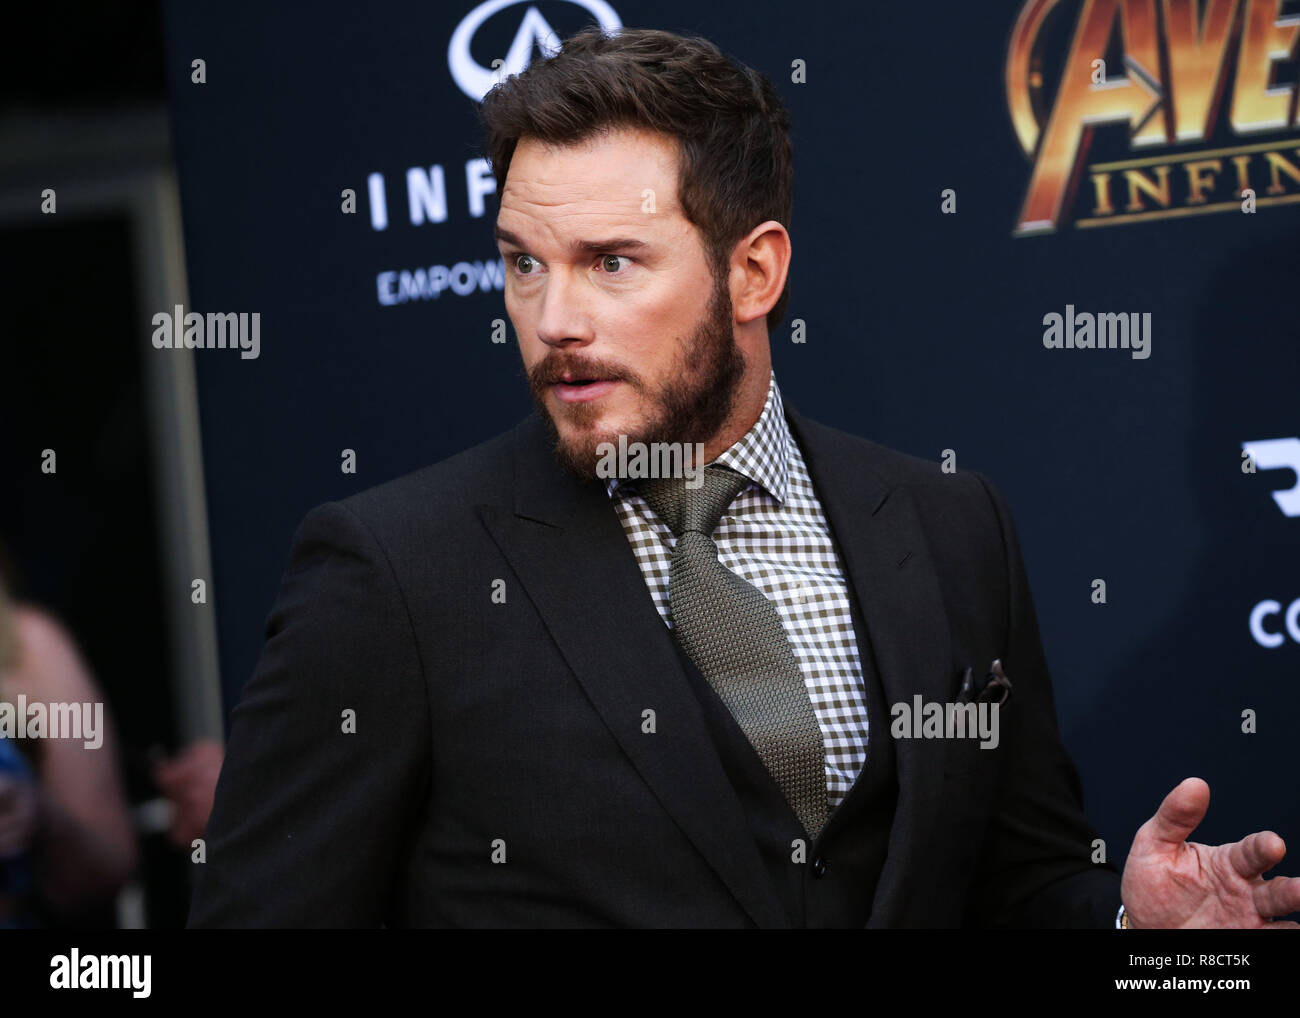 HOLLYWOOD, LOS ANGELES, CA, USA - APRIL 23: Chris Pratt at the World Premiere Of Disney And Marvel's 'Avengers: Infinity War' held at the El Capitan Theatre, Dolby Theatre and TCL Chinese Theatre IMAX on April 23, 2018 in Hollywood, Los Angeles, California, United States. (Photo by Xavier Collin/Image Press Agency) Stock Photo